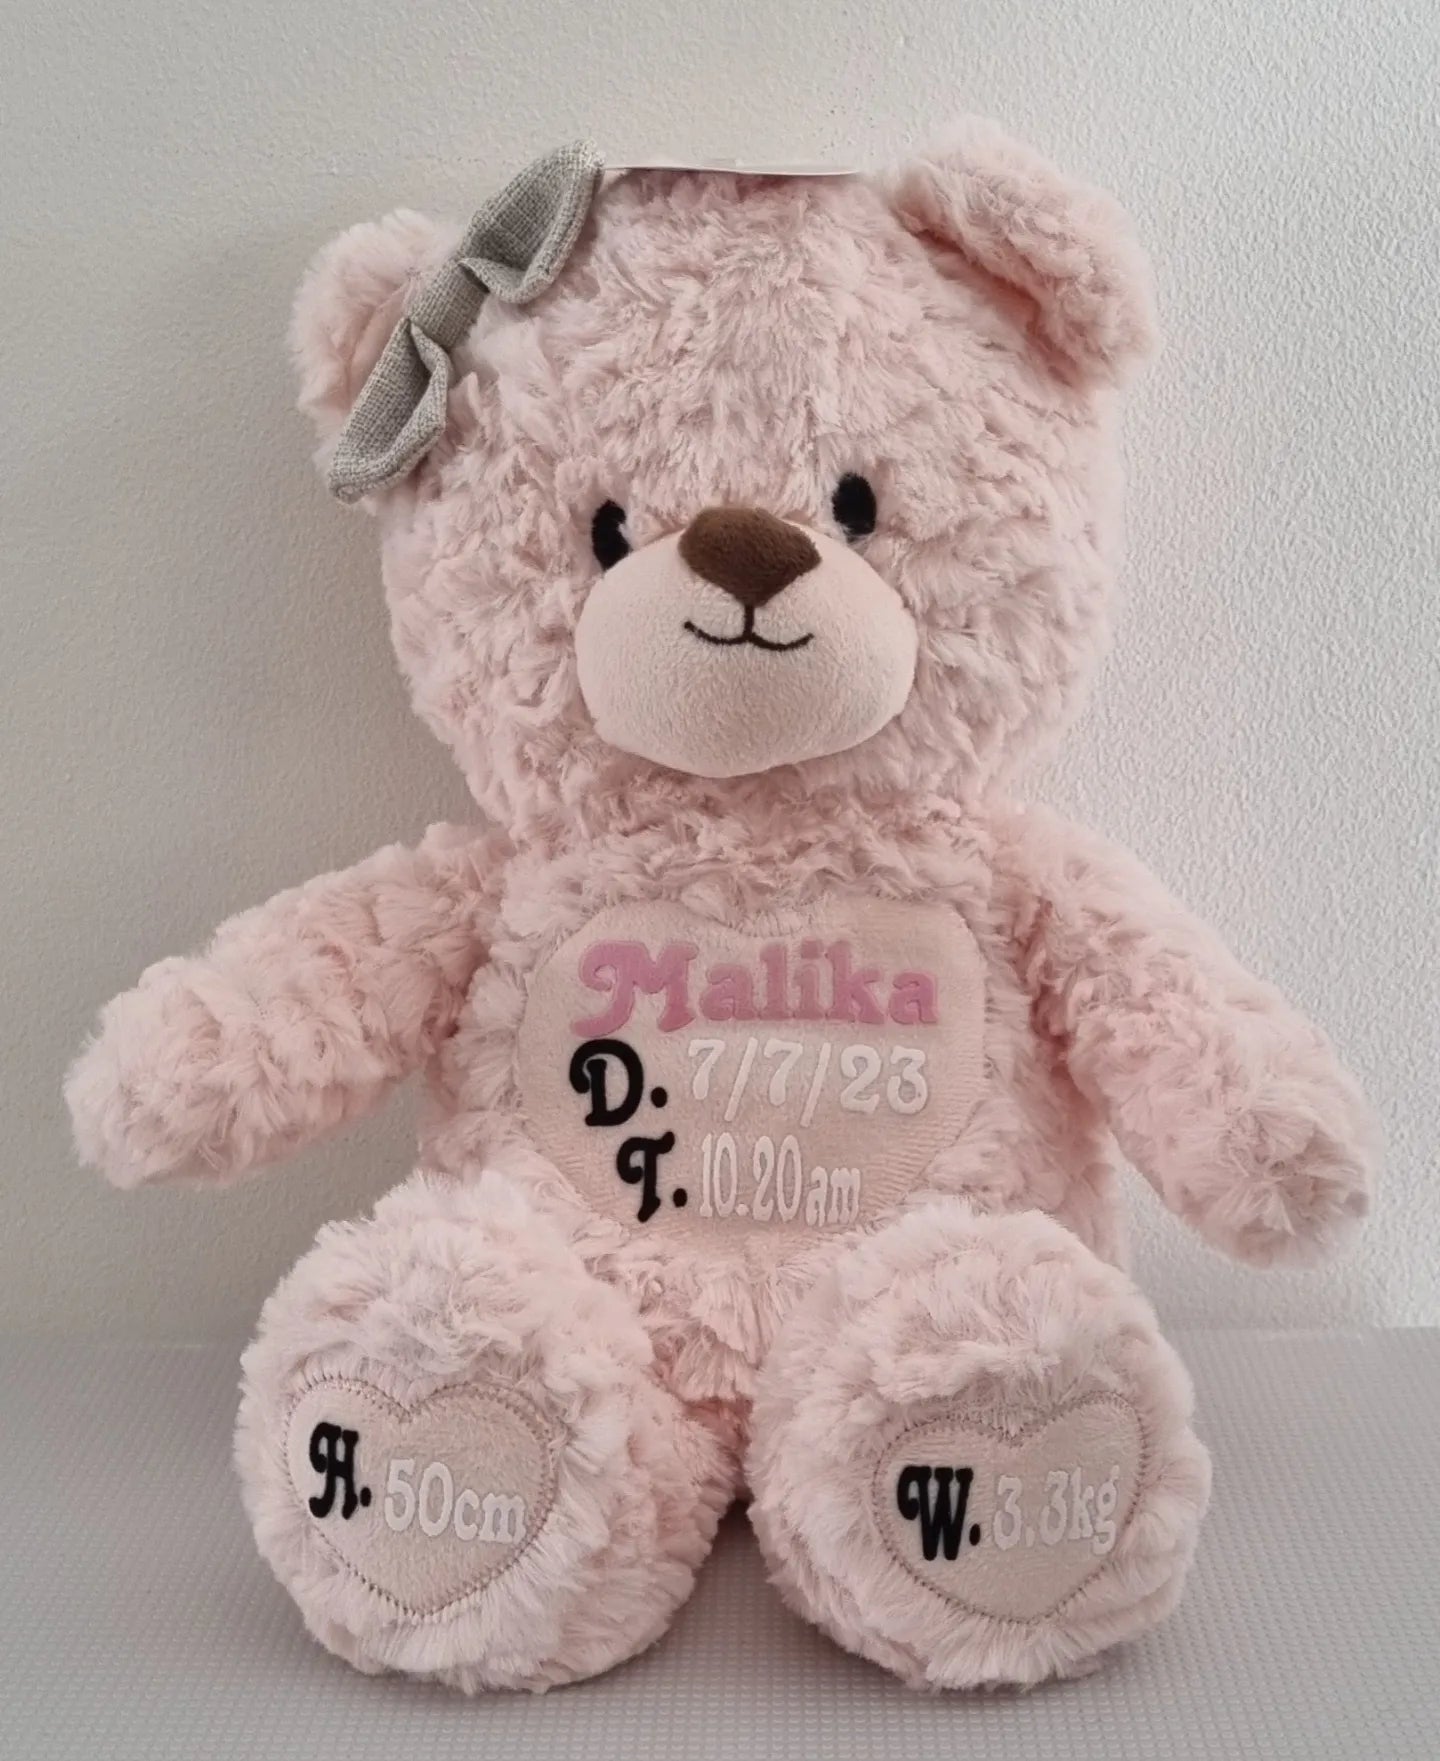 Birth announcement plush teddy, front side